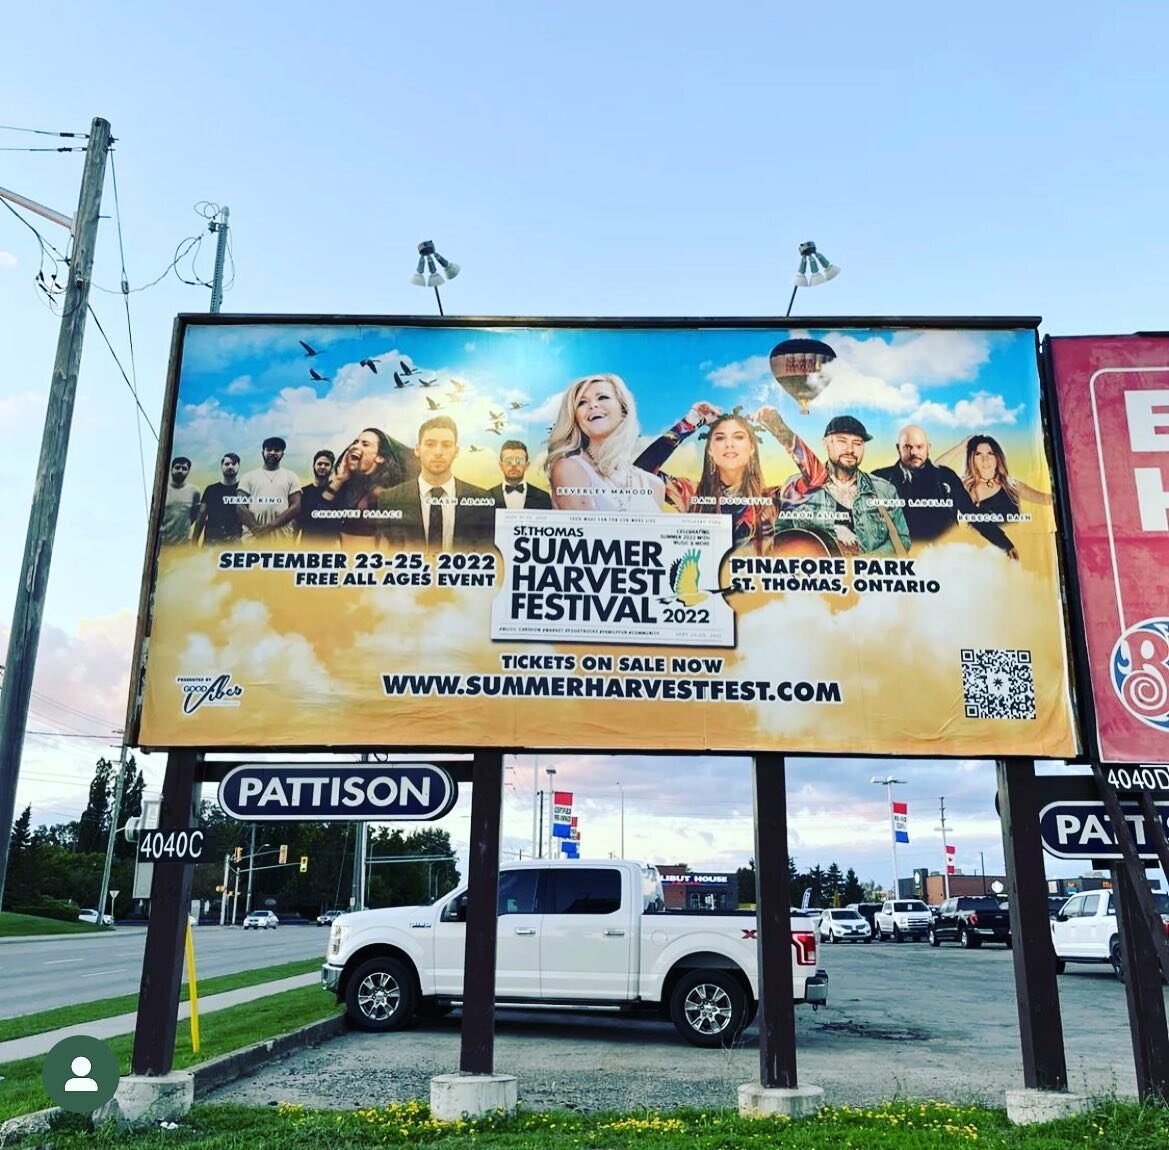 Thank you @pattisonoutdoor @sttshf for posting this pic of billboard for @sttshf that I will be performing at Sept 25th! Get your tickets at www.summerharvestfest.com